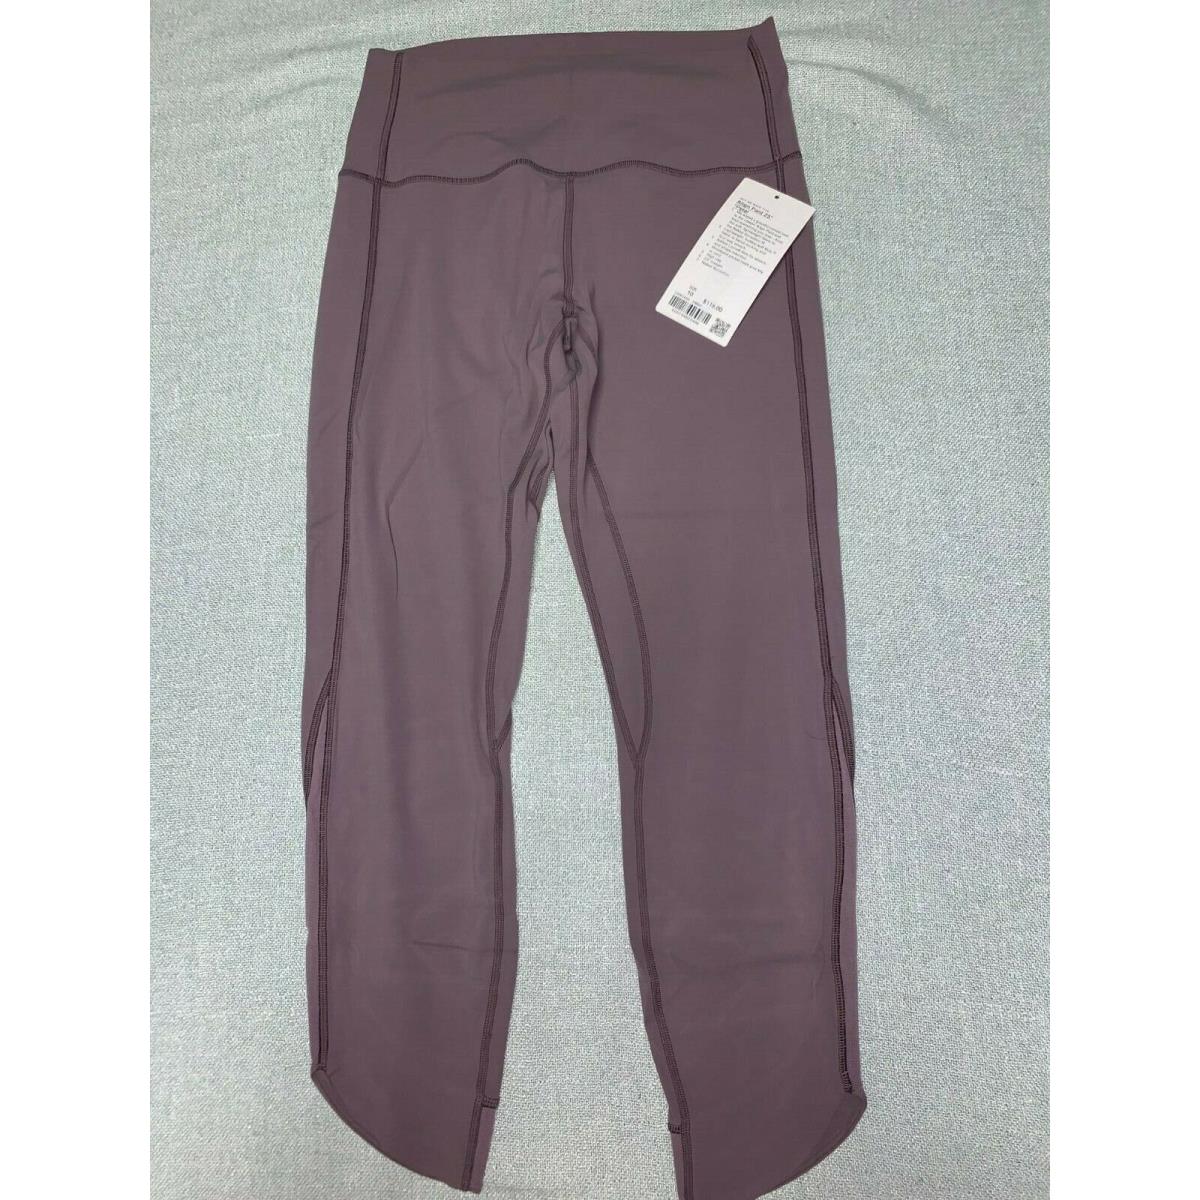 Lululemon Align Pant 25 Petal Frosted Mulberry Size 10